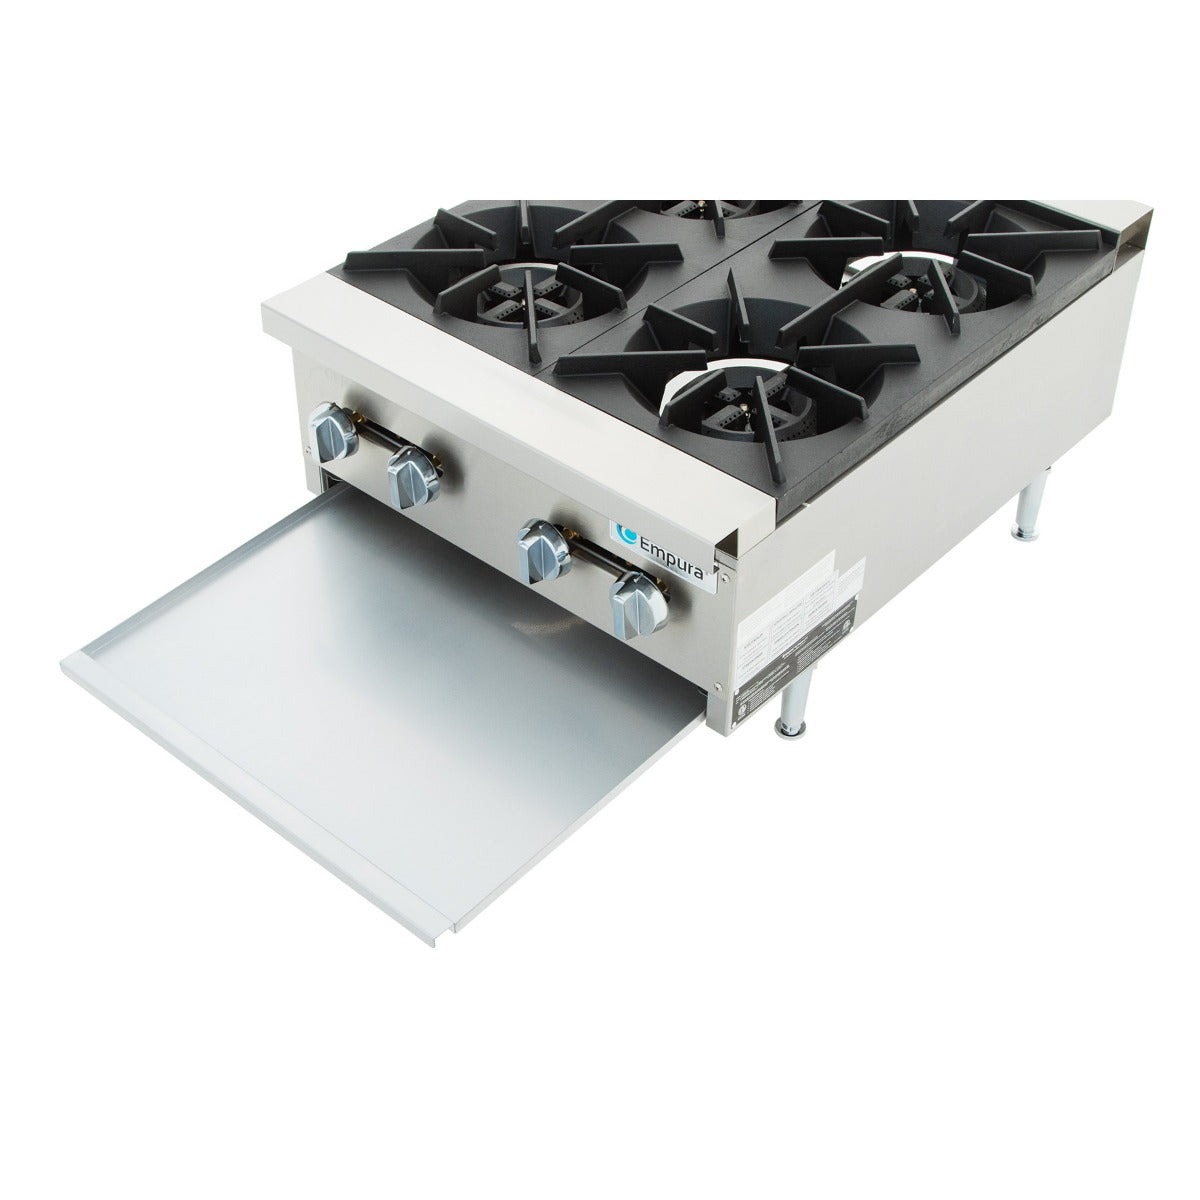 Empura EMHP4-HD 24" Stainless Steel Heavy Duty Gas Hot Plate With 4 Burners, 120,000 BTU